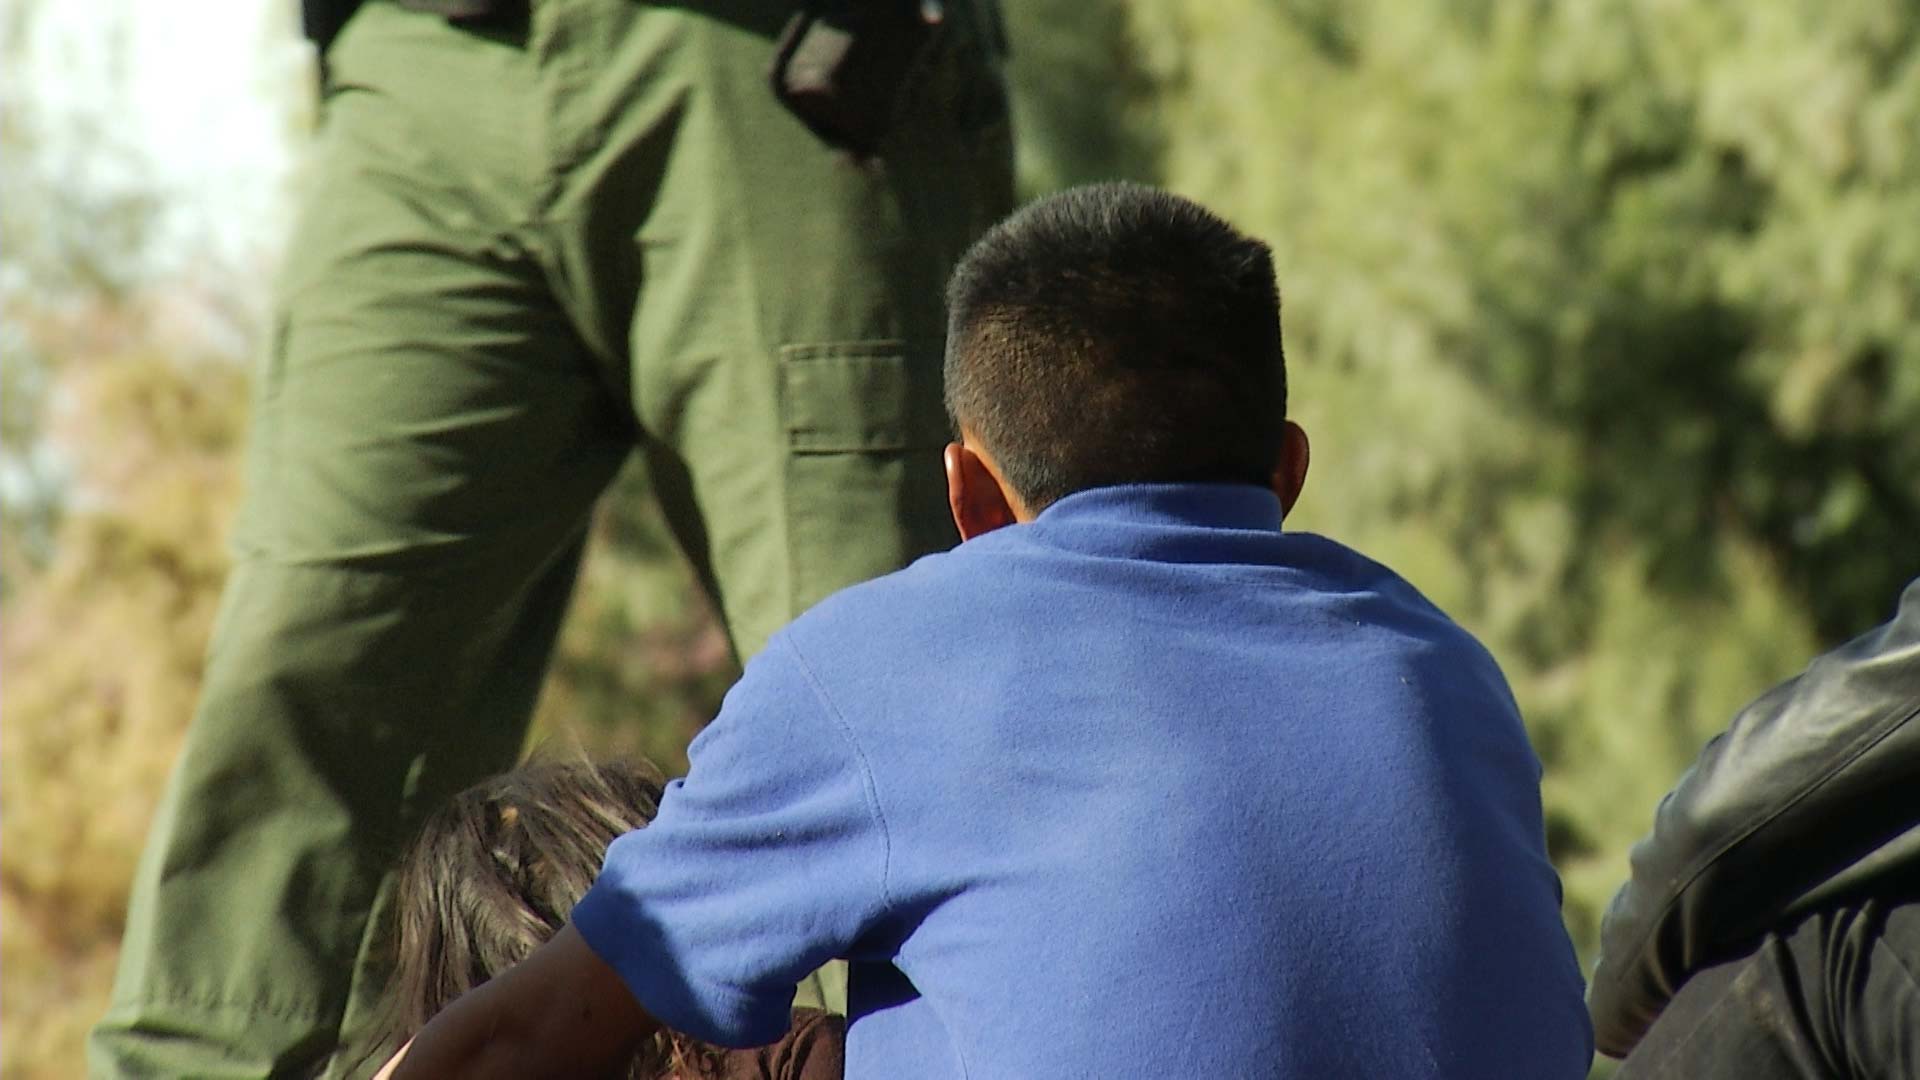 A child and a man await processing by border agents as part of a group seeking asylum in the Yuma Sector, December 2018.